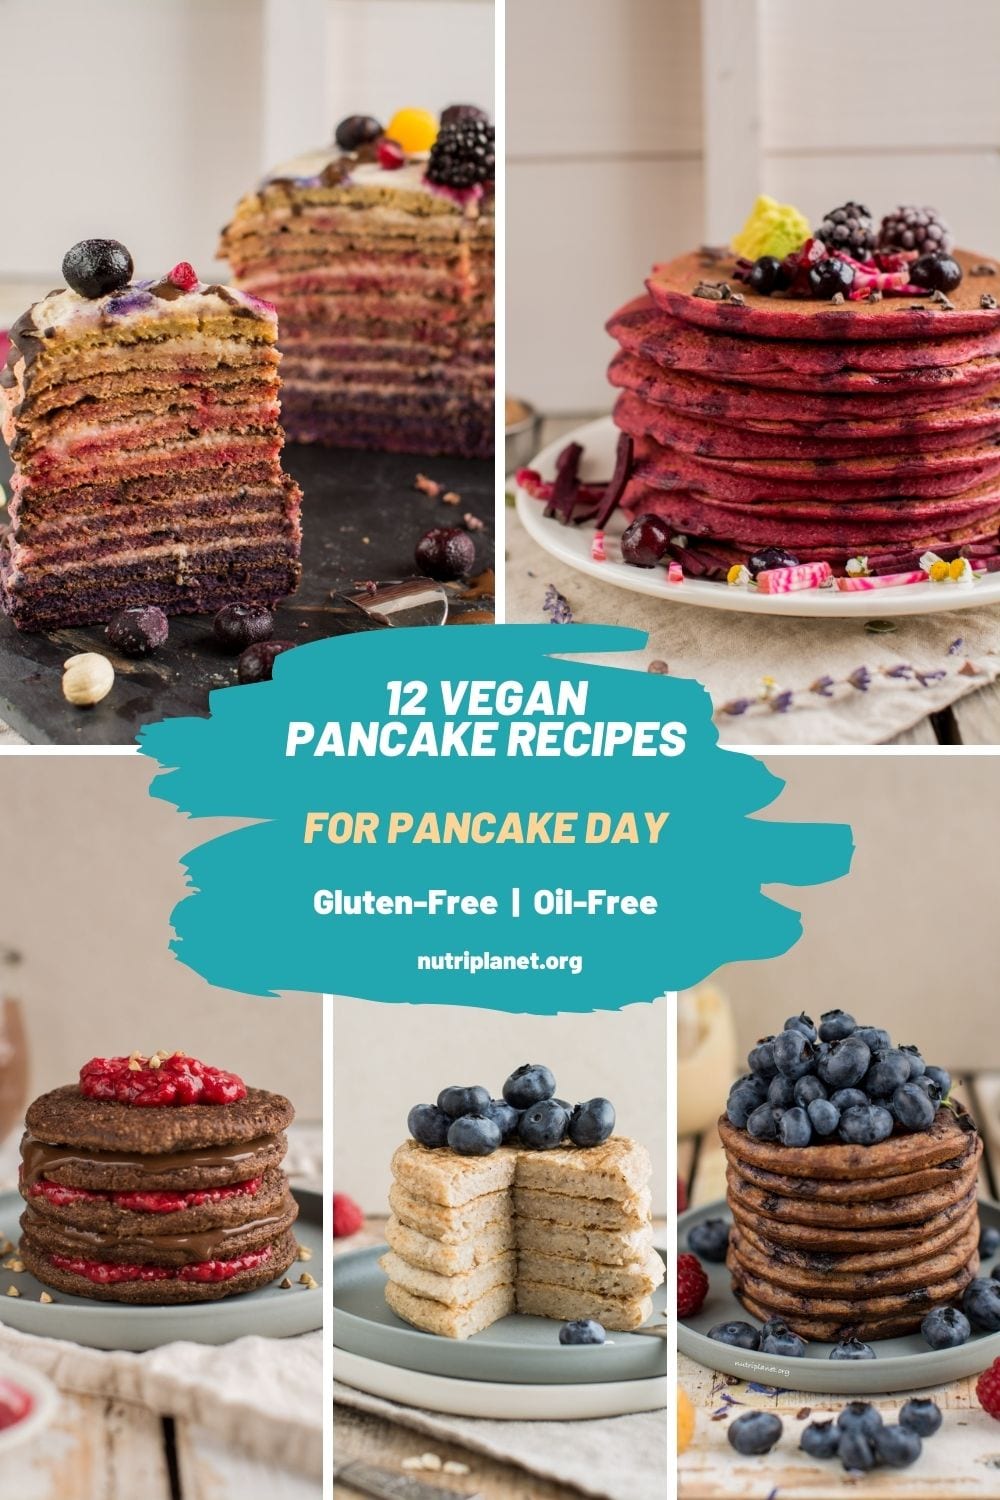 Pancake Day round-up: 12 vegan pancakes that are oil-free, gluten-free and refined sugar free.